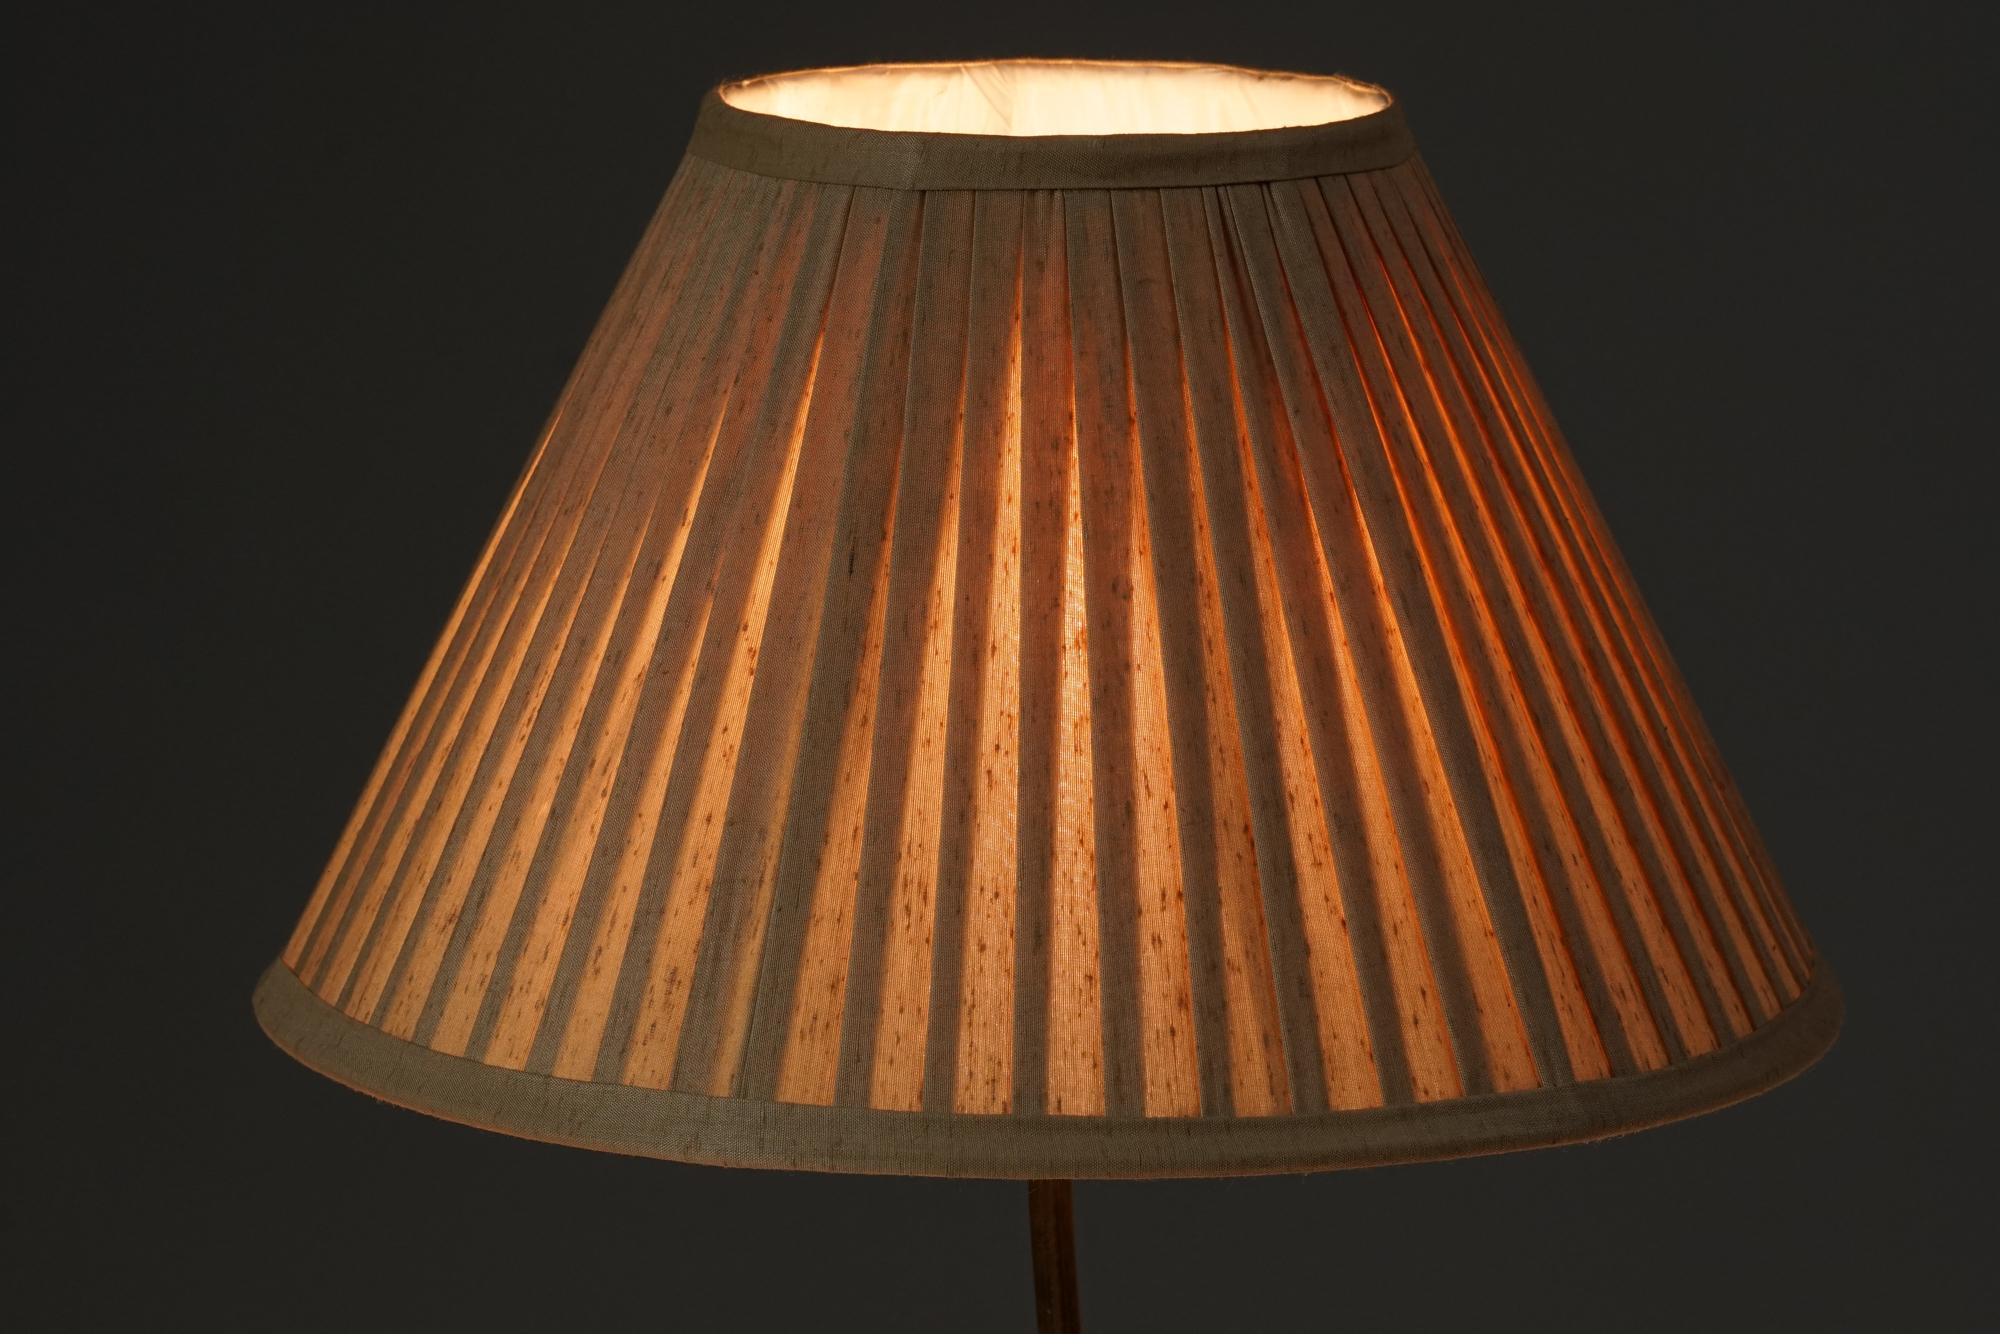 Table light, manufactured by Valinte Oy, 1950s. Brass with linen lampshade. Marked. Good vintage condition, minor patina consistent with age and use. 